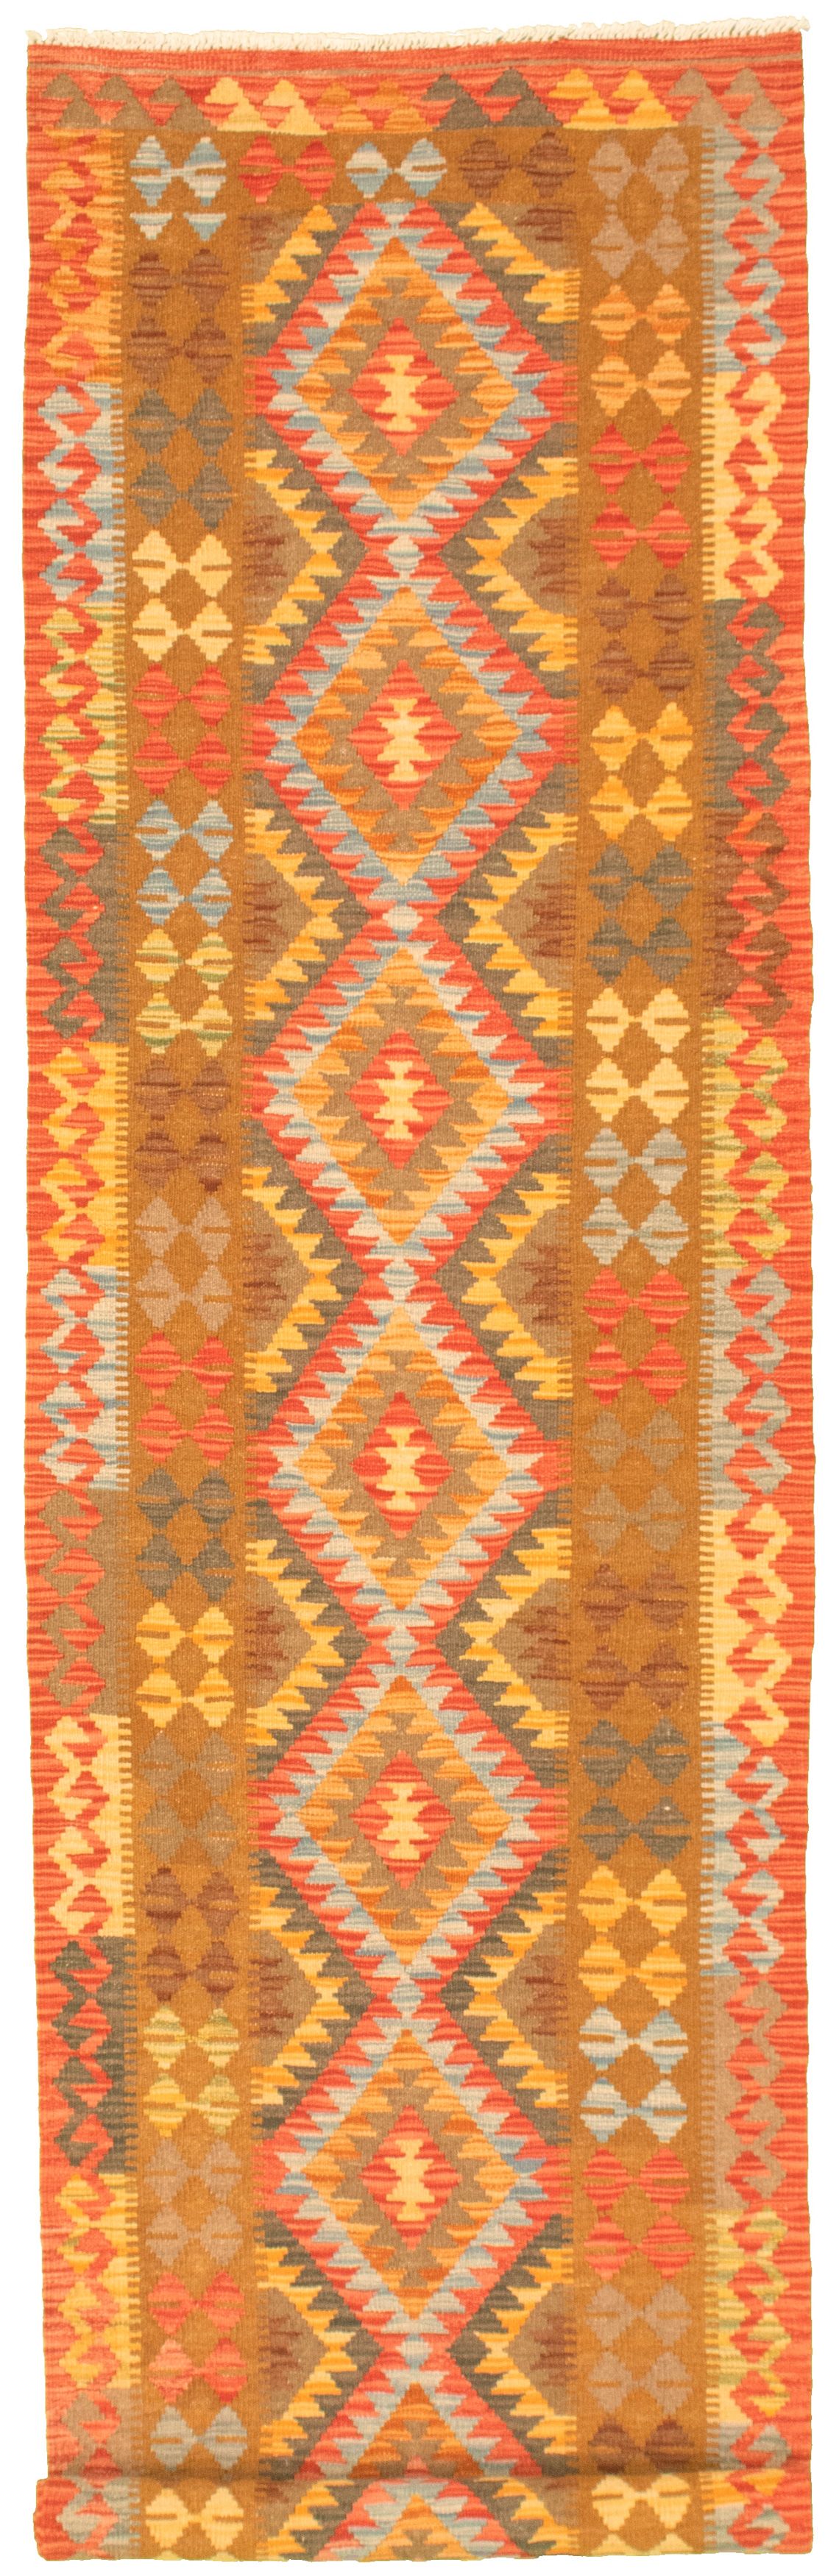 Hand woven Bold and Colorful  Red Wool Kilim 2'8" x 12'9" Size: 2'8" x 12'9"  